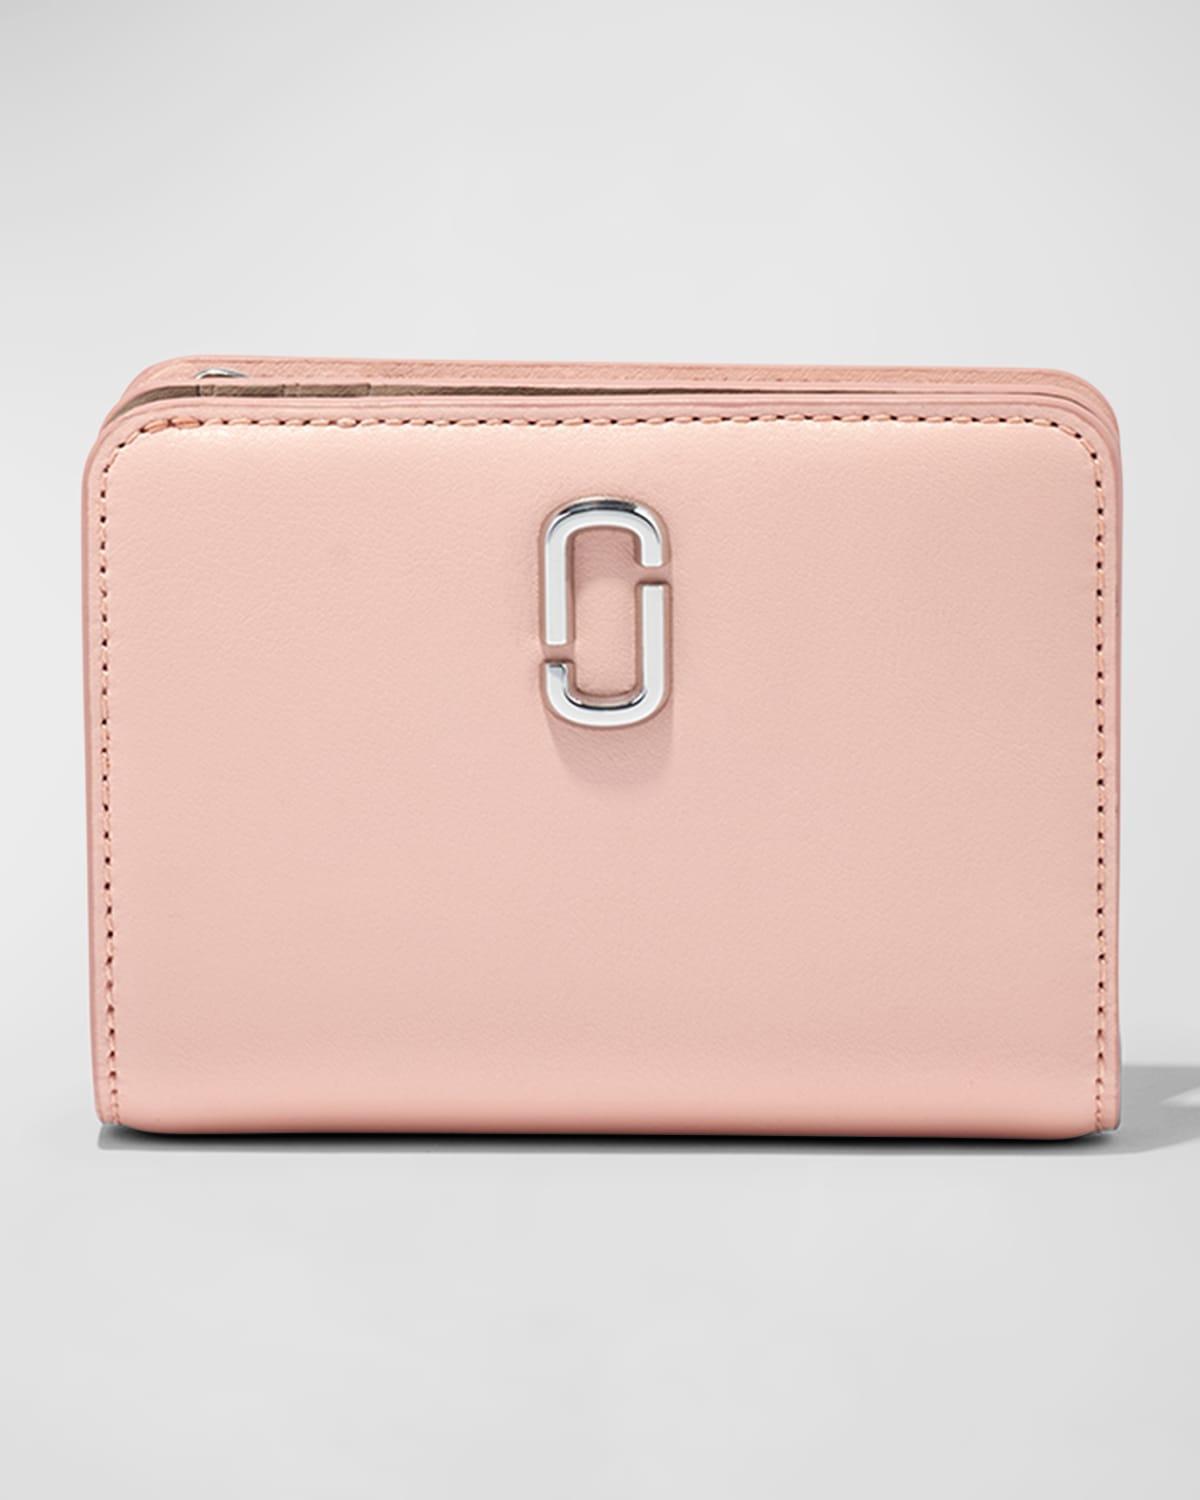 The J Marc Mini Compact Wallet Product Image